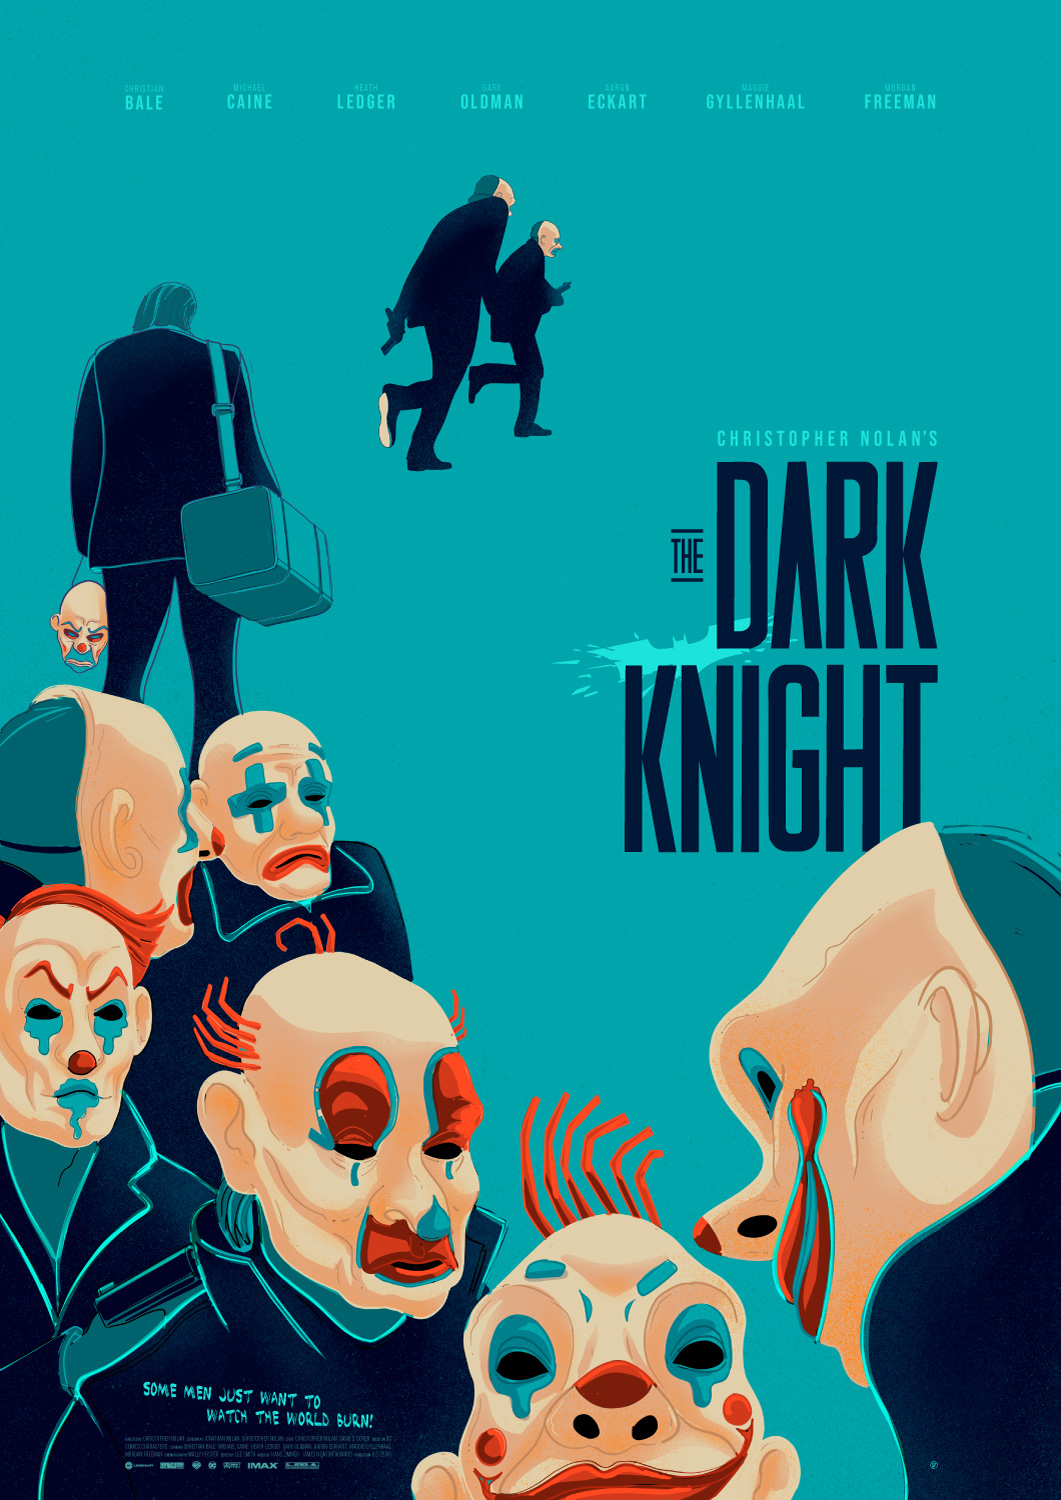 The Dark Knight (2008) – Illustrated poster